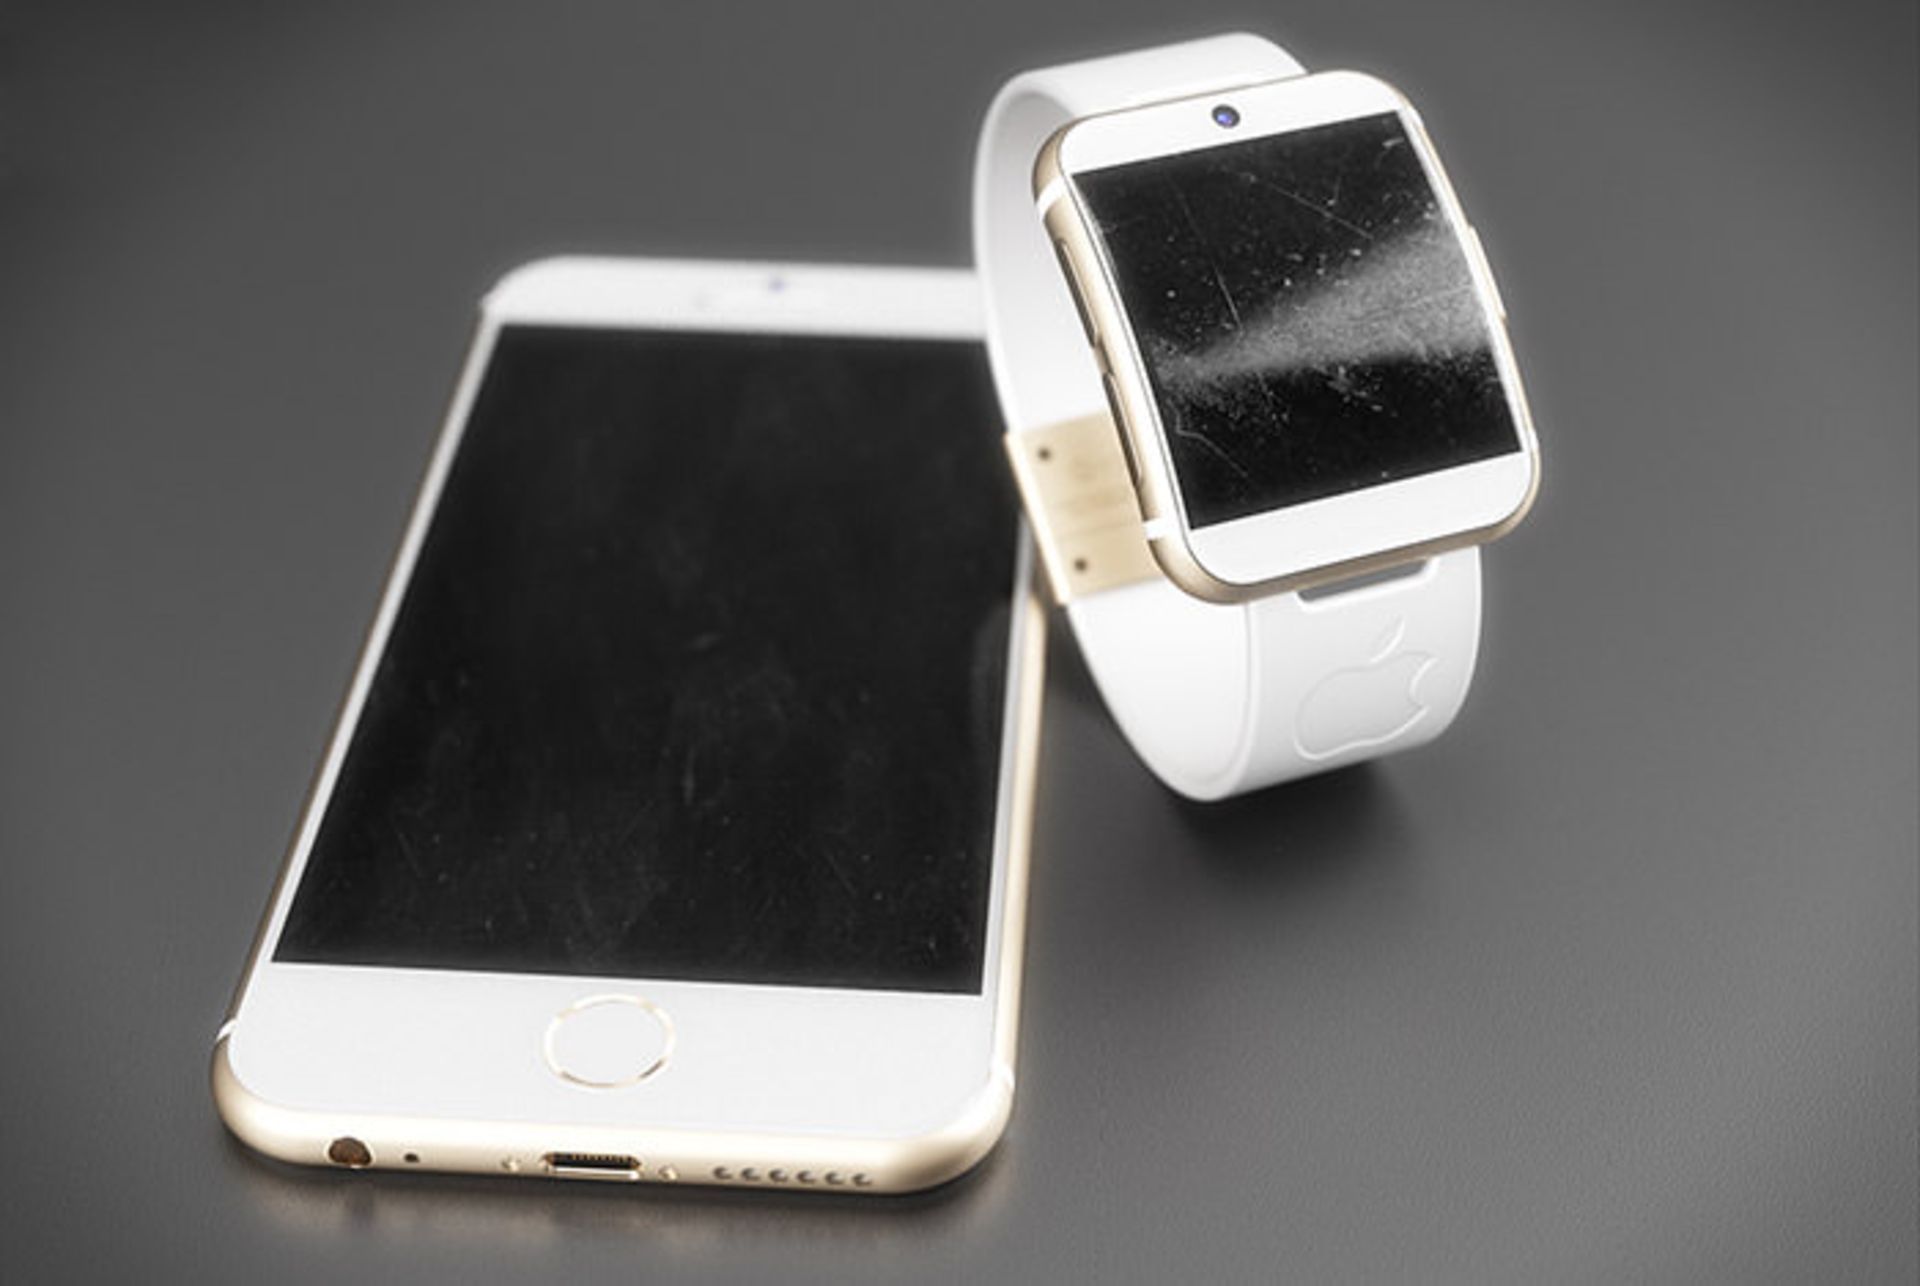 12Apple-iWatch-concept-shows-dreamy-curves-iPhone-esque-looks